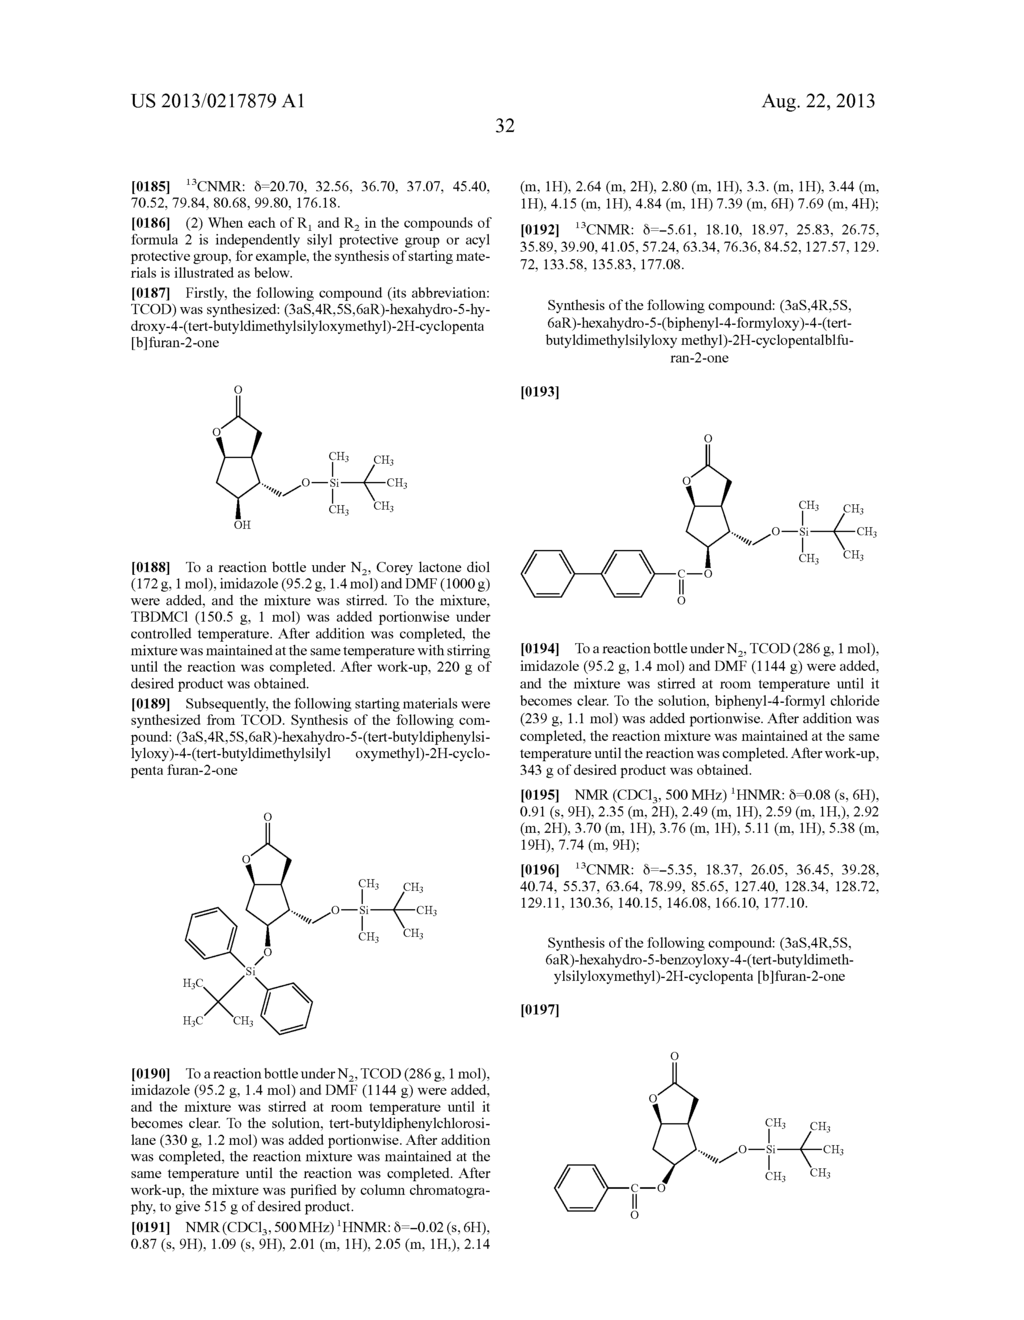 ENTECAVIR SYNTHESIS METHOD AND INTERMEDIATE COMPOUND THEREOF - diagram, schematic, and image 33